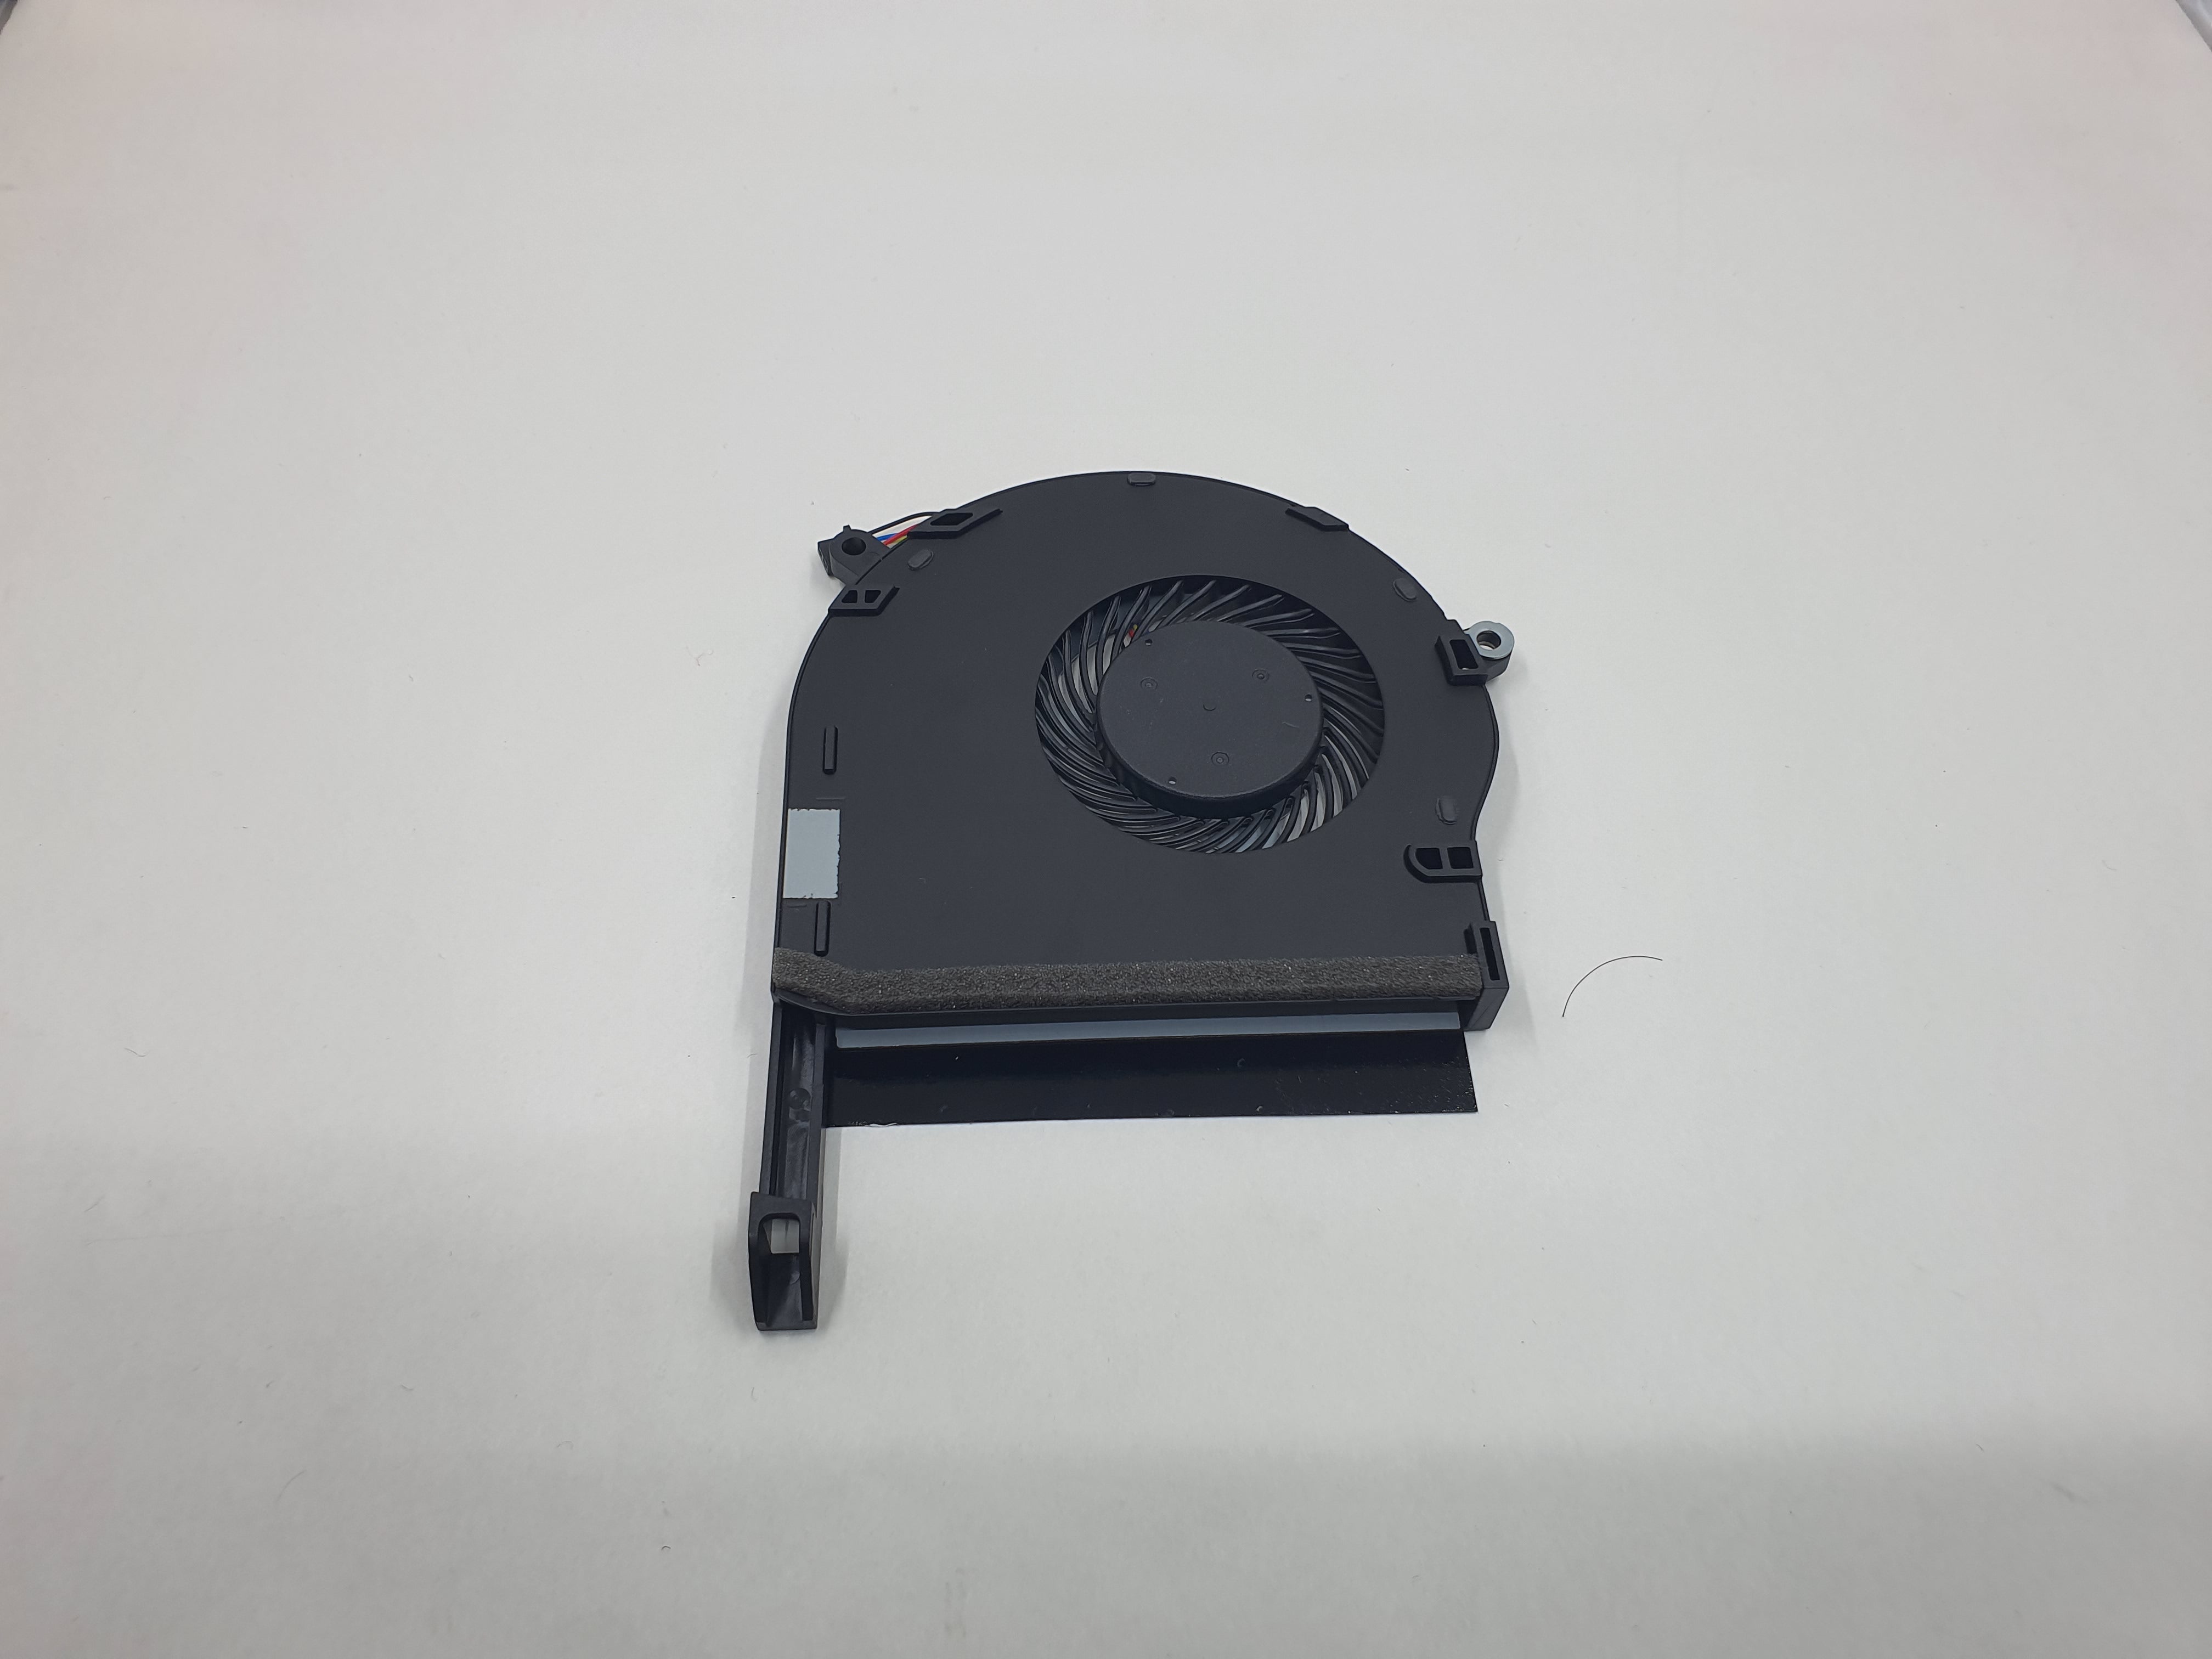 Asus Thermal Fan FX504GD WL for Asus TUF Gaming FX504GD-E4423